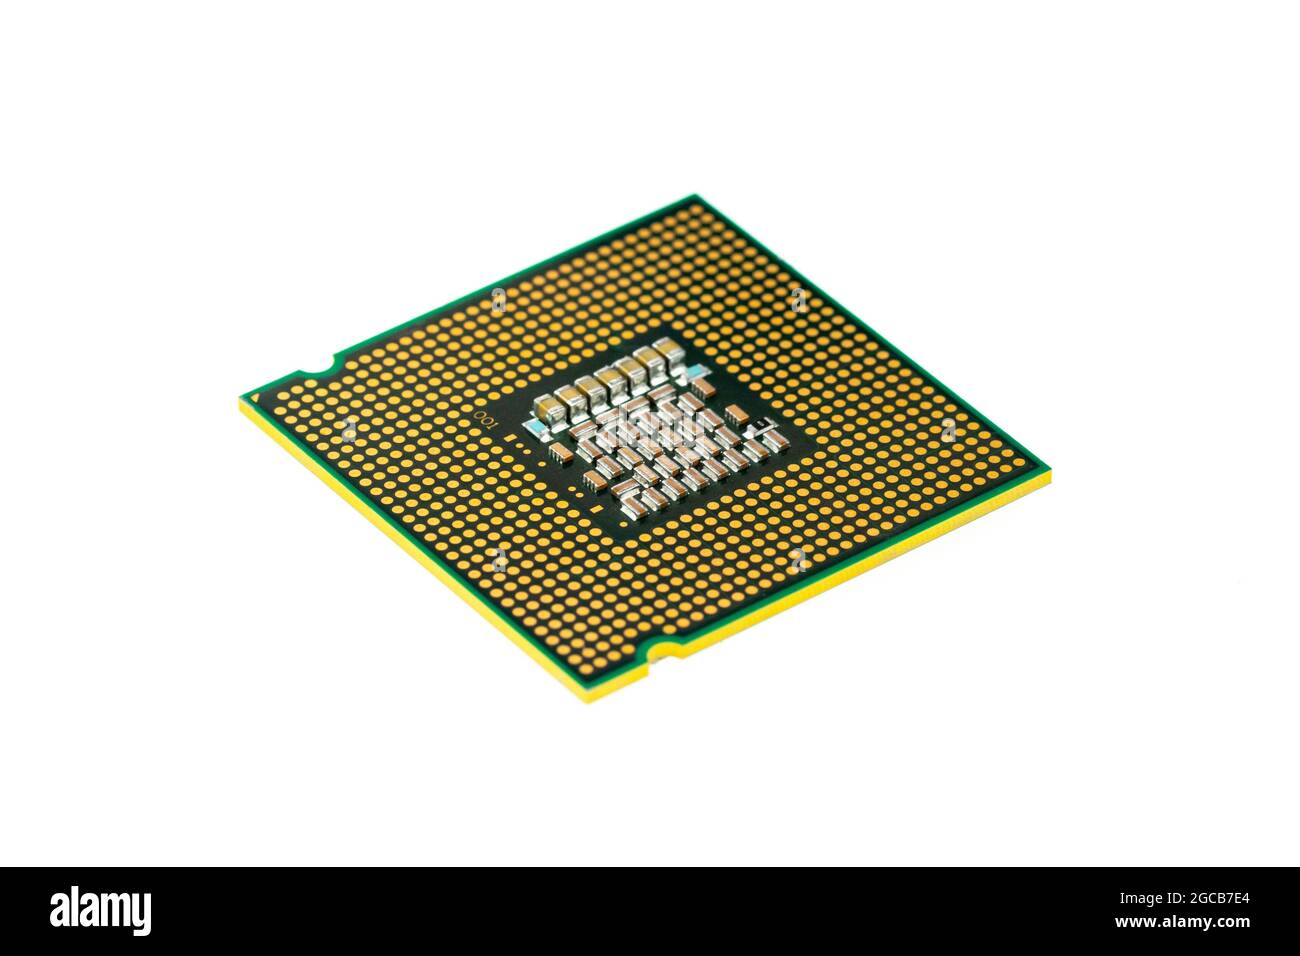 Image of cpu processor chip on a white background. Equipment and computer hardware. Central Processing Unit., Microprocessor. Stock Photo